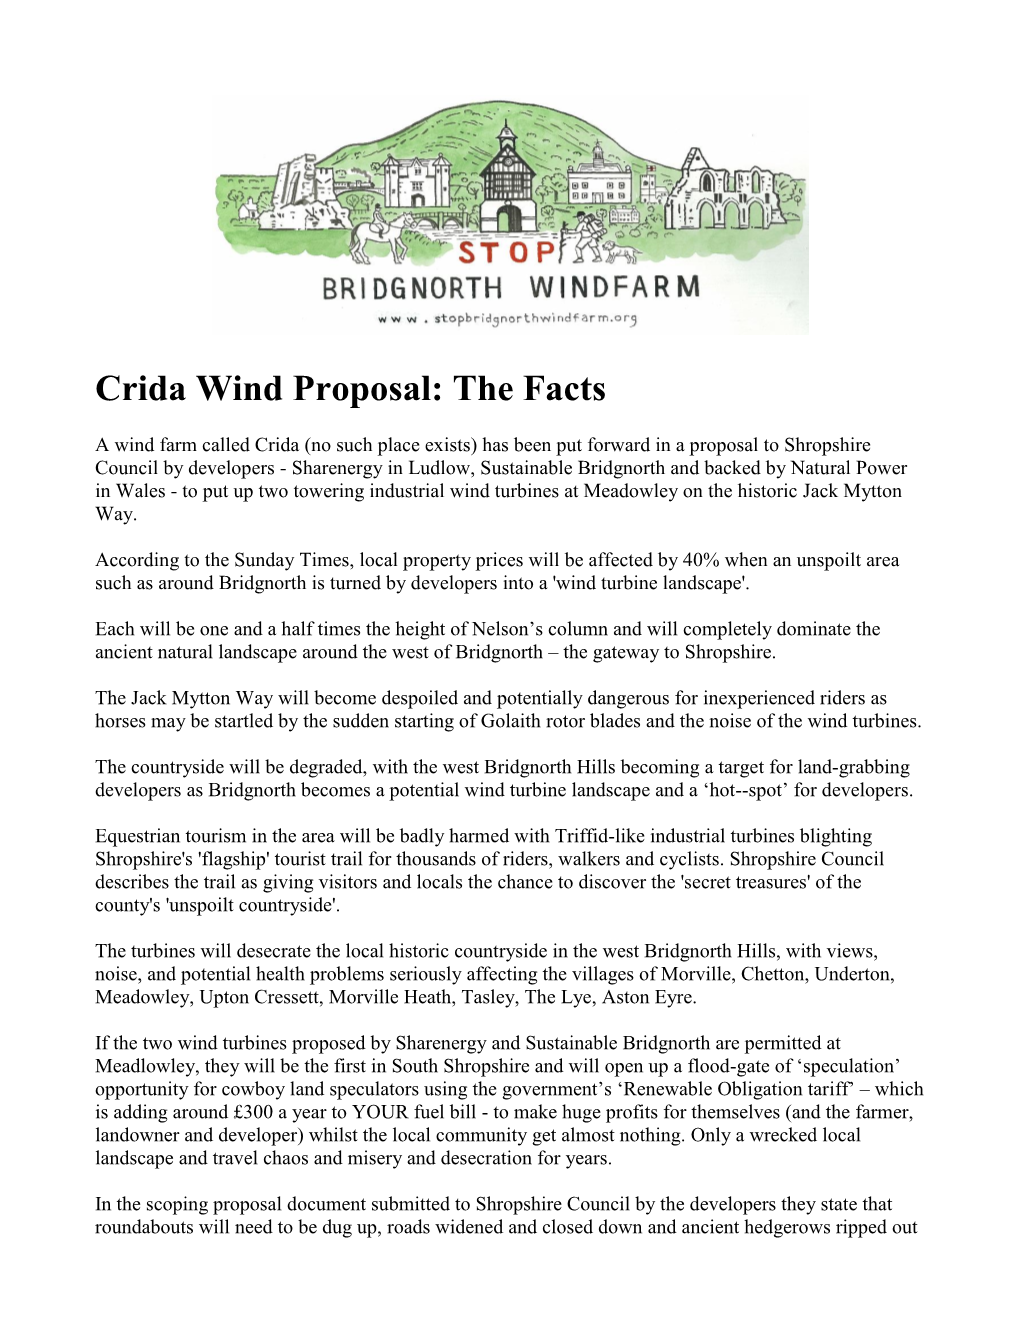 Crida Wind Proposal: the Facts